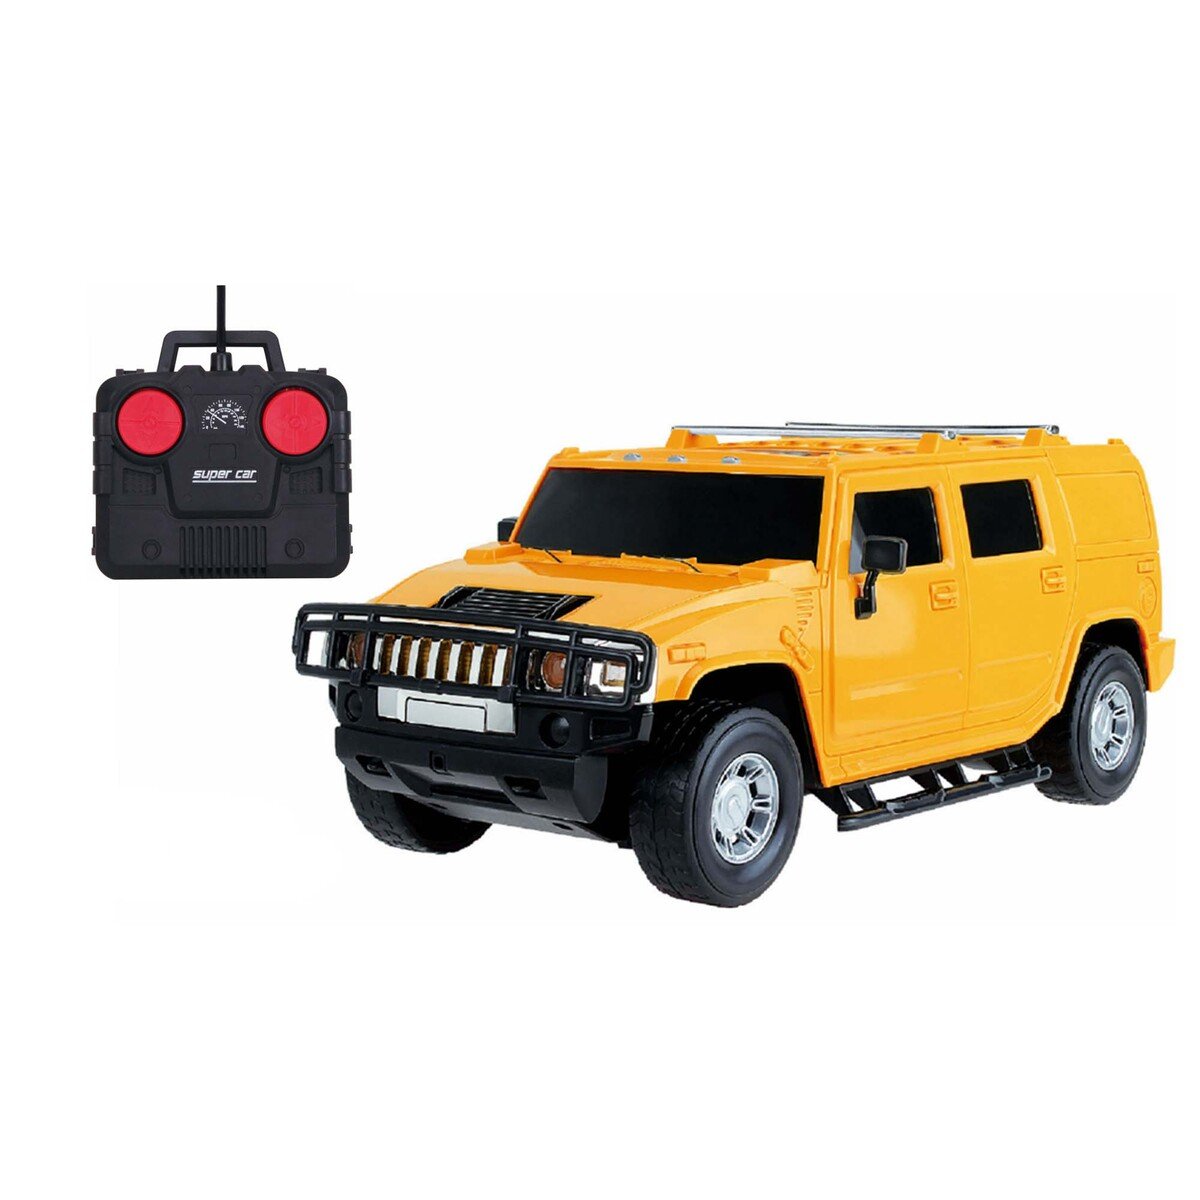 Skid Fusion Rechargeable Remote Control Model Car SF5002-2